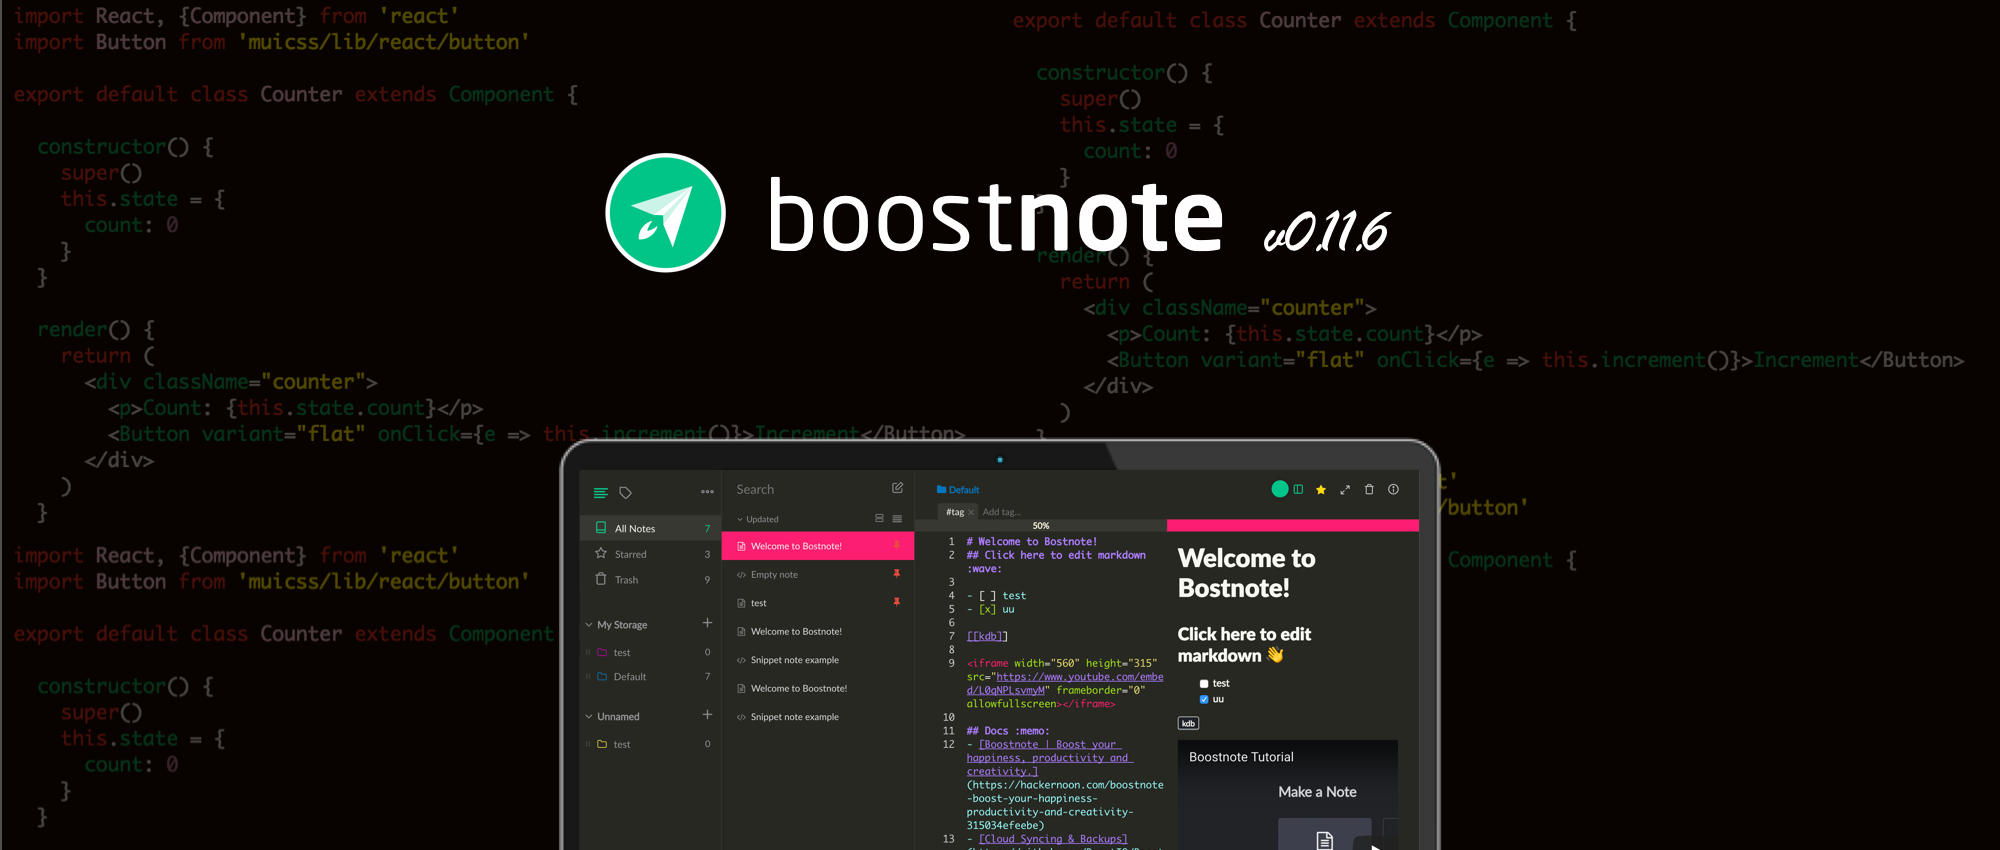 Boostnote V0 11 6 Release Subscribe To The Newsletter By Kz Boost Note Medium